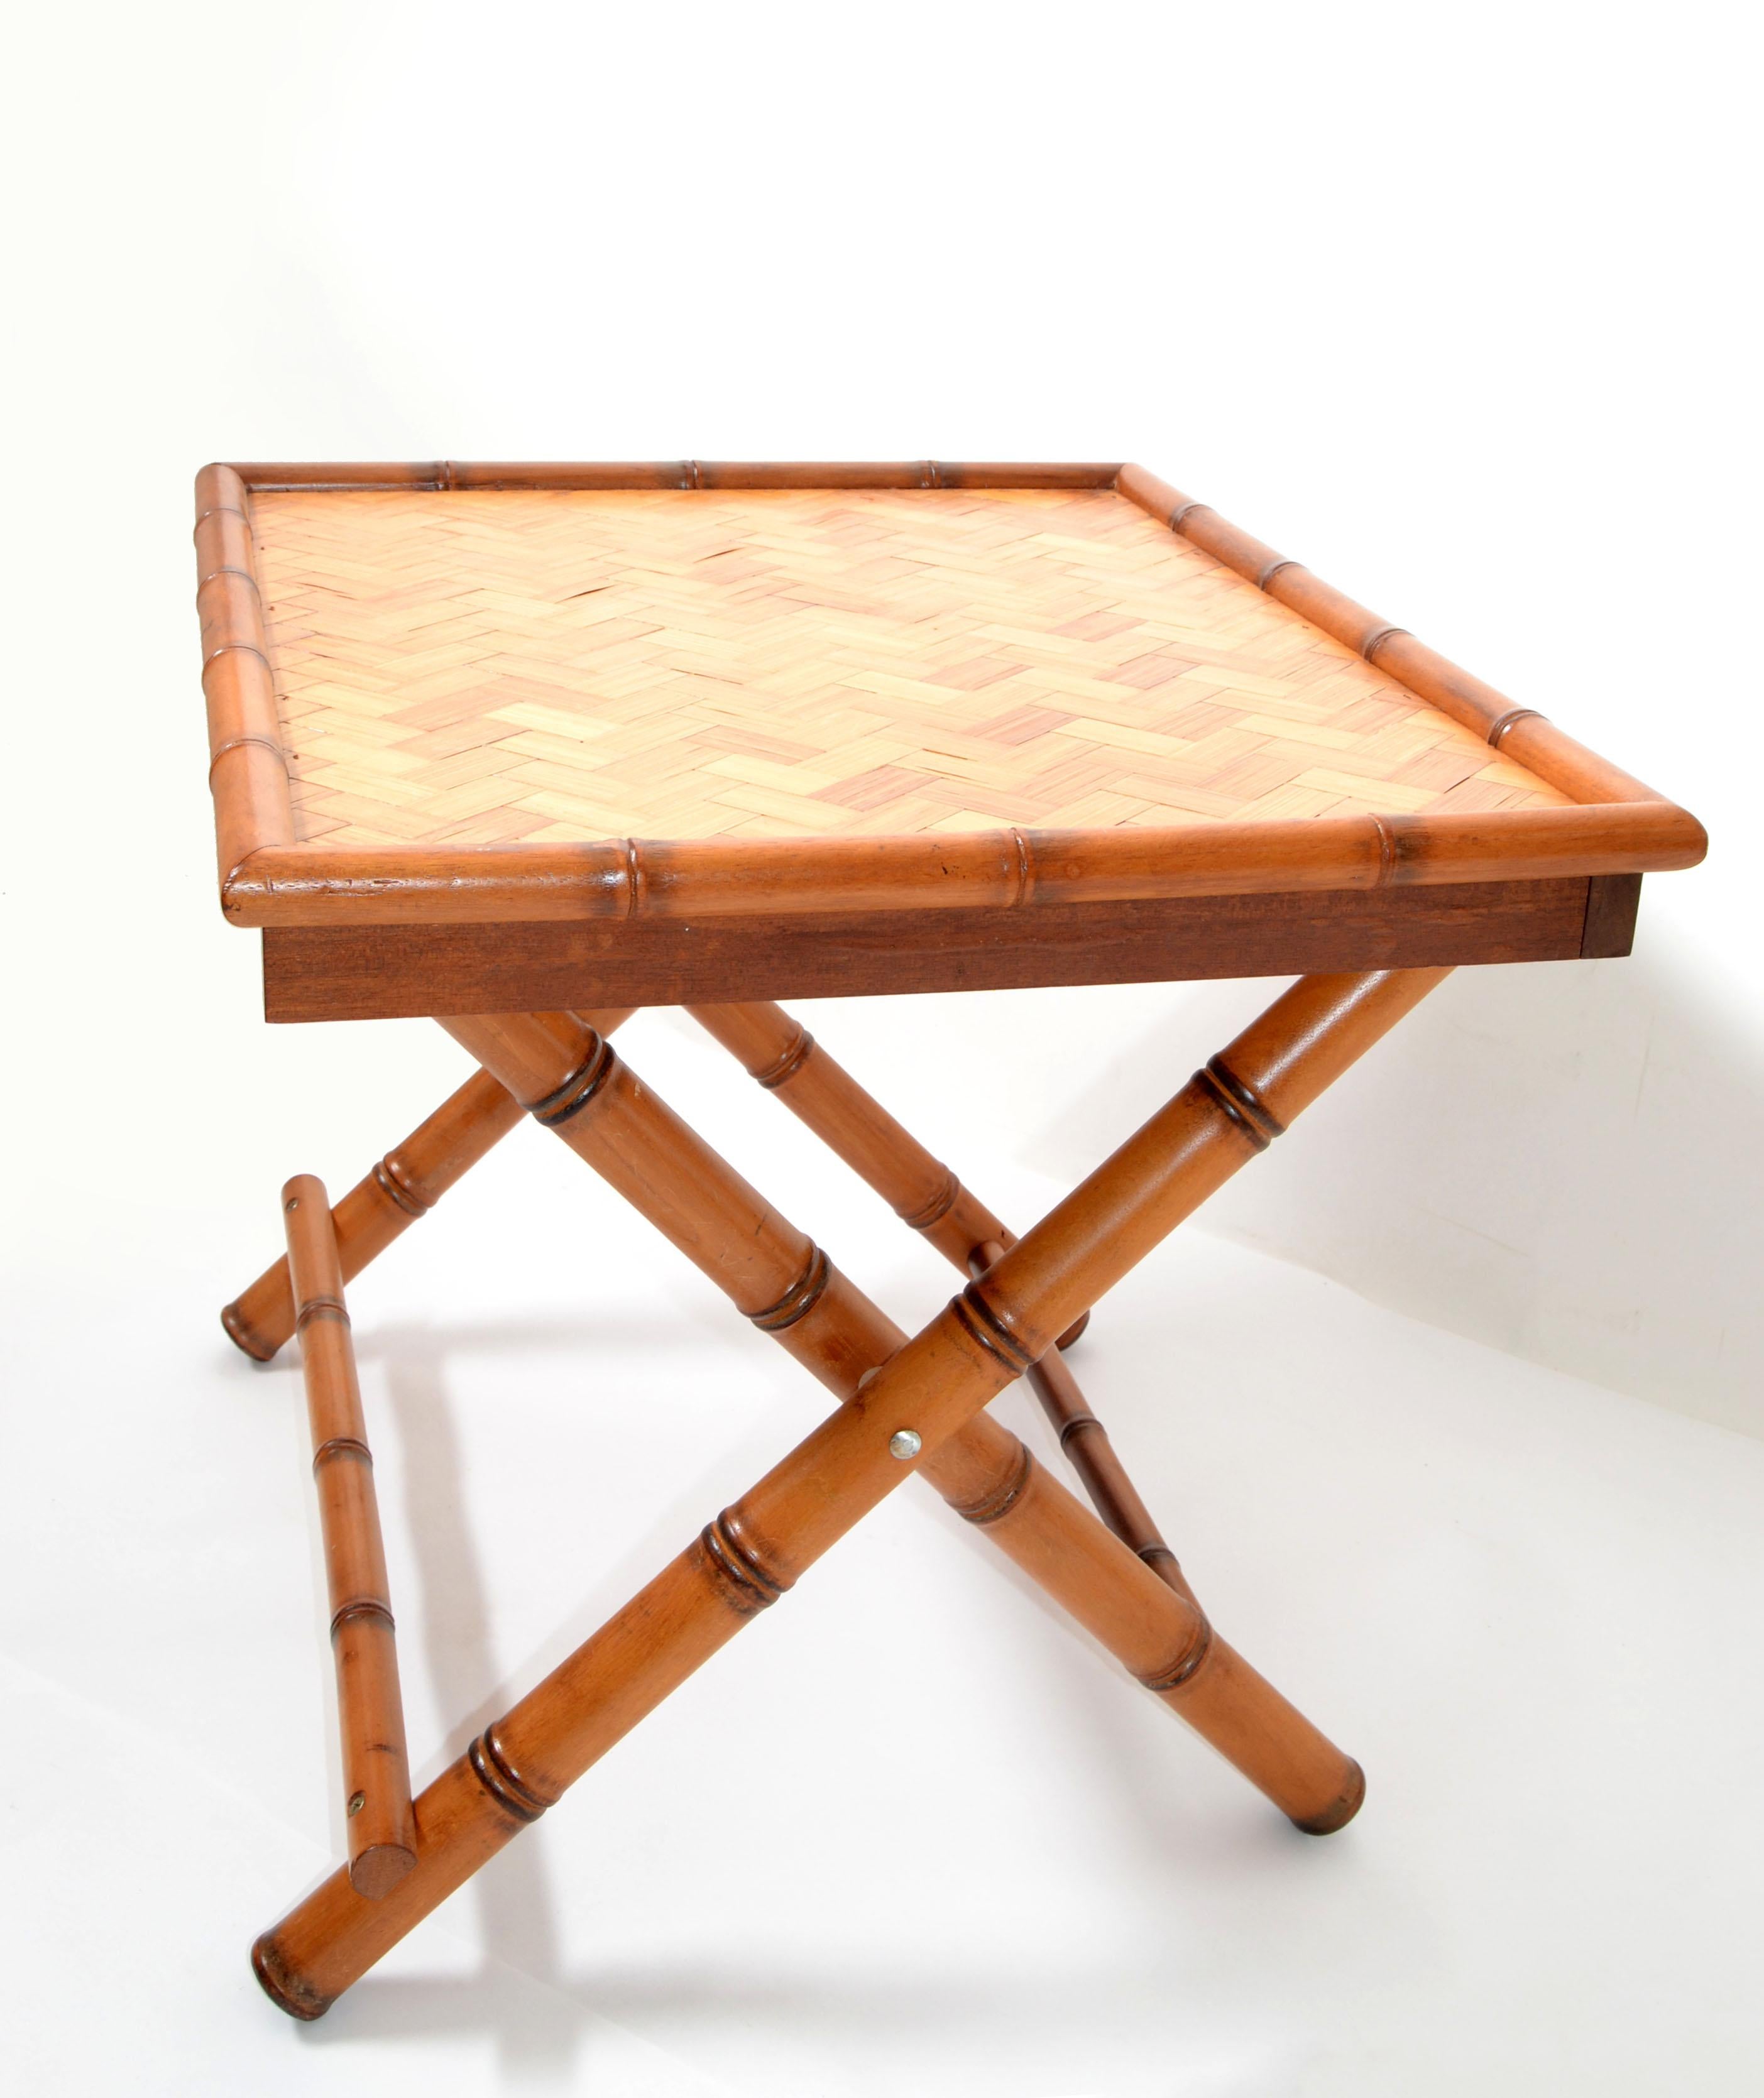 Vintage Handcrafted Rectangle Bamboo Serving Folding Table, Center Table X-Base In Good Condition For Sale In Miami, FL